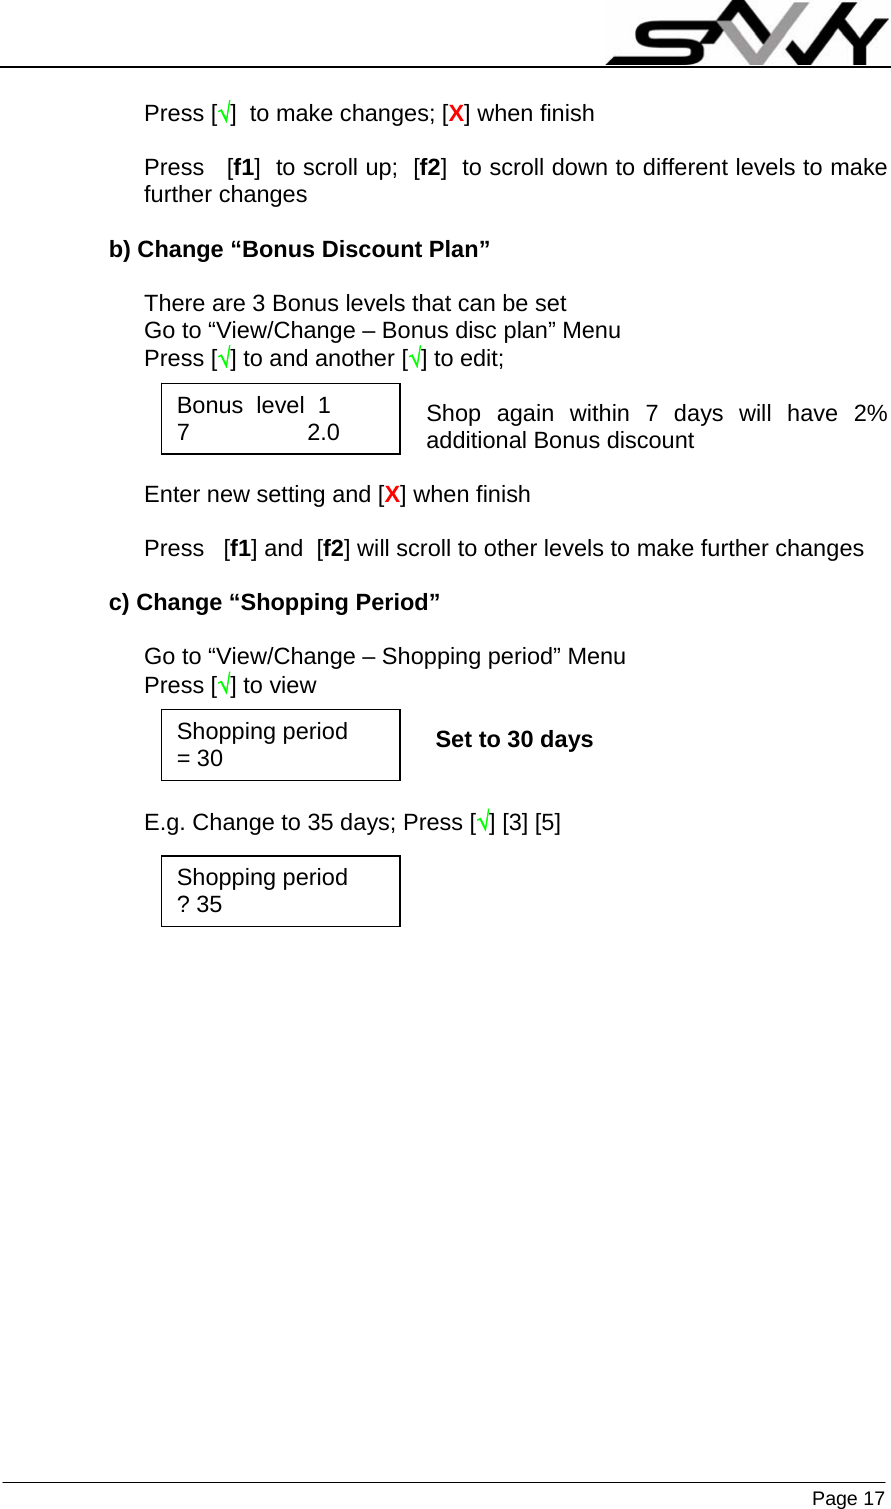                    Page 17   Press [√]  to make changes; [X] when finish  Press   [f1]  to scroll up;  [f2]  to scroll down to different levels to make further changes  b) Change “Bonus Discount Plan”  There are 3 Bonus levels that can be set Go to “View/Change – Bonus disc plan” Menu Press [√] to and another [√] to edit;   Shop again within 7 days will have 2% additional Bonus discount  Enter new setting and [X] when finish  Press   [f1] and  [f2] will scroll to other levels to make further changes  c) Change “Shopping Period”  Go to “View/Change – Shopping period” Menu Press [√] to view                                                    Set to 30 days   E.g. Change to 35 days; Press [√] [3] [5]      Bonus  level  1 7                  2.0 Shopping period = 30 Shopping period ? 35 